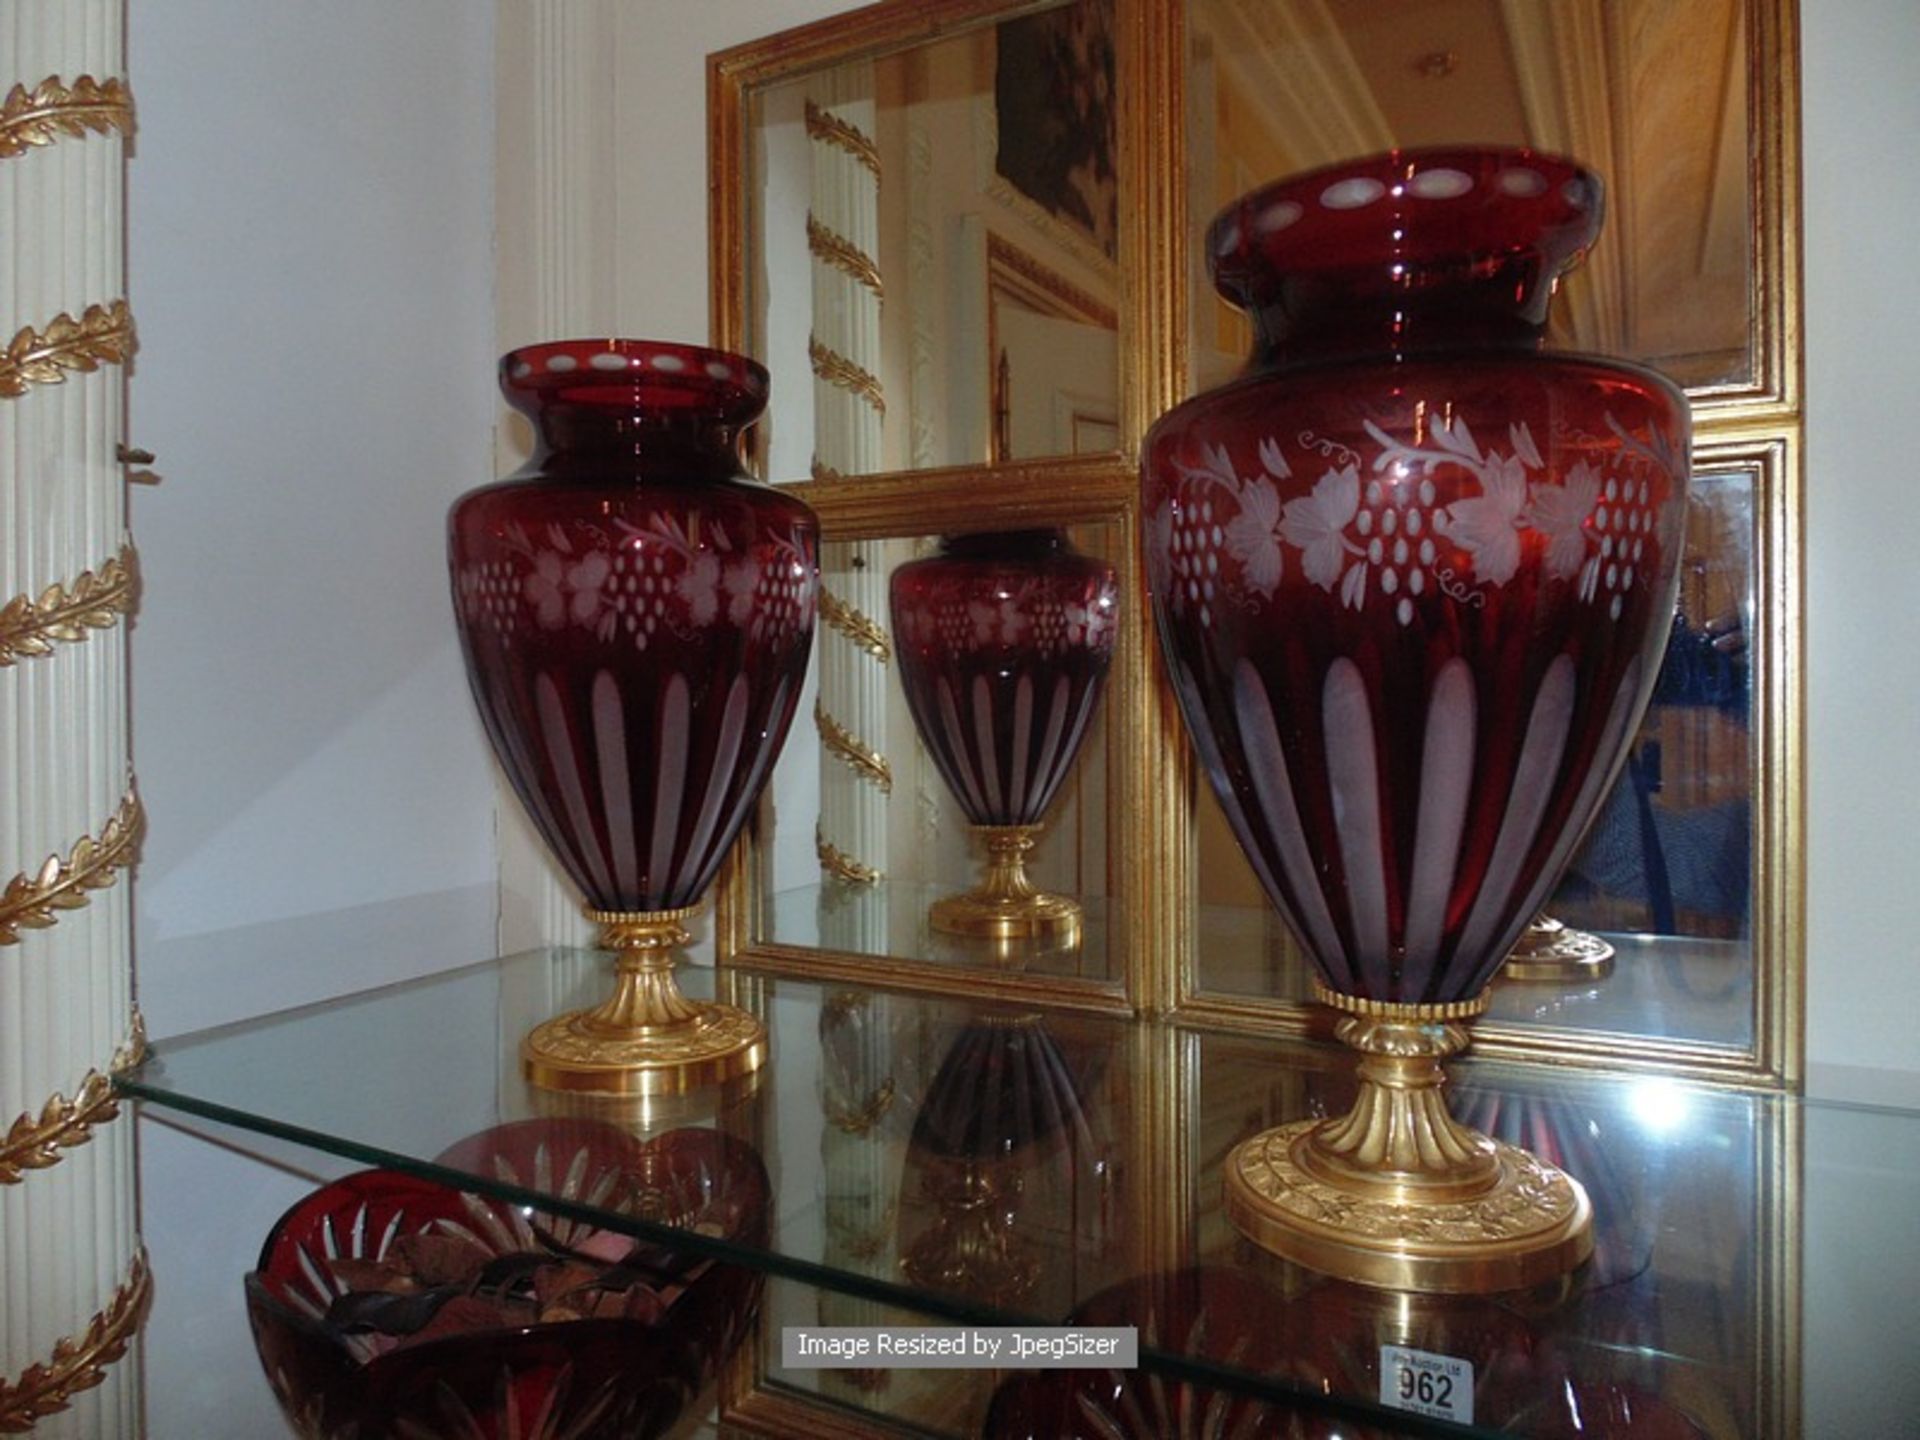 A pair of Baldi Home Jewels stunning ruby red and clear crystal vases mounted on bronze plinth 340mm - Image 3 of 3